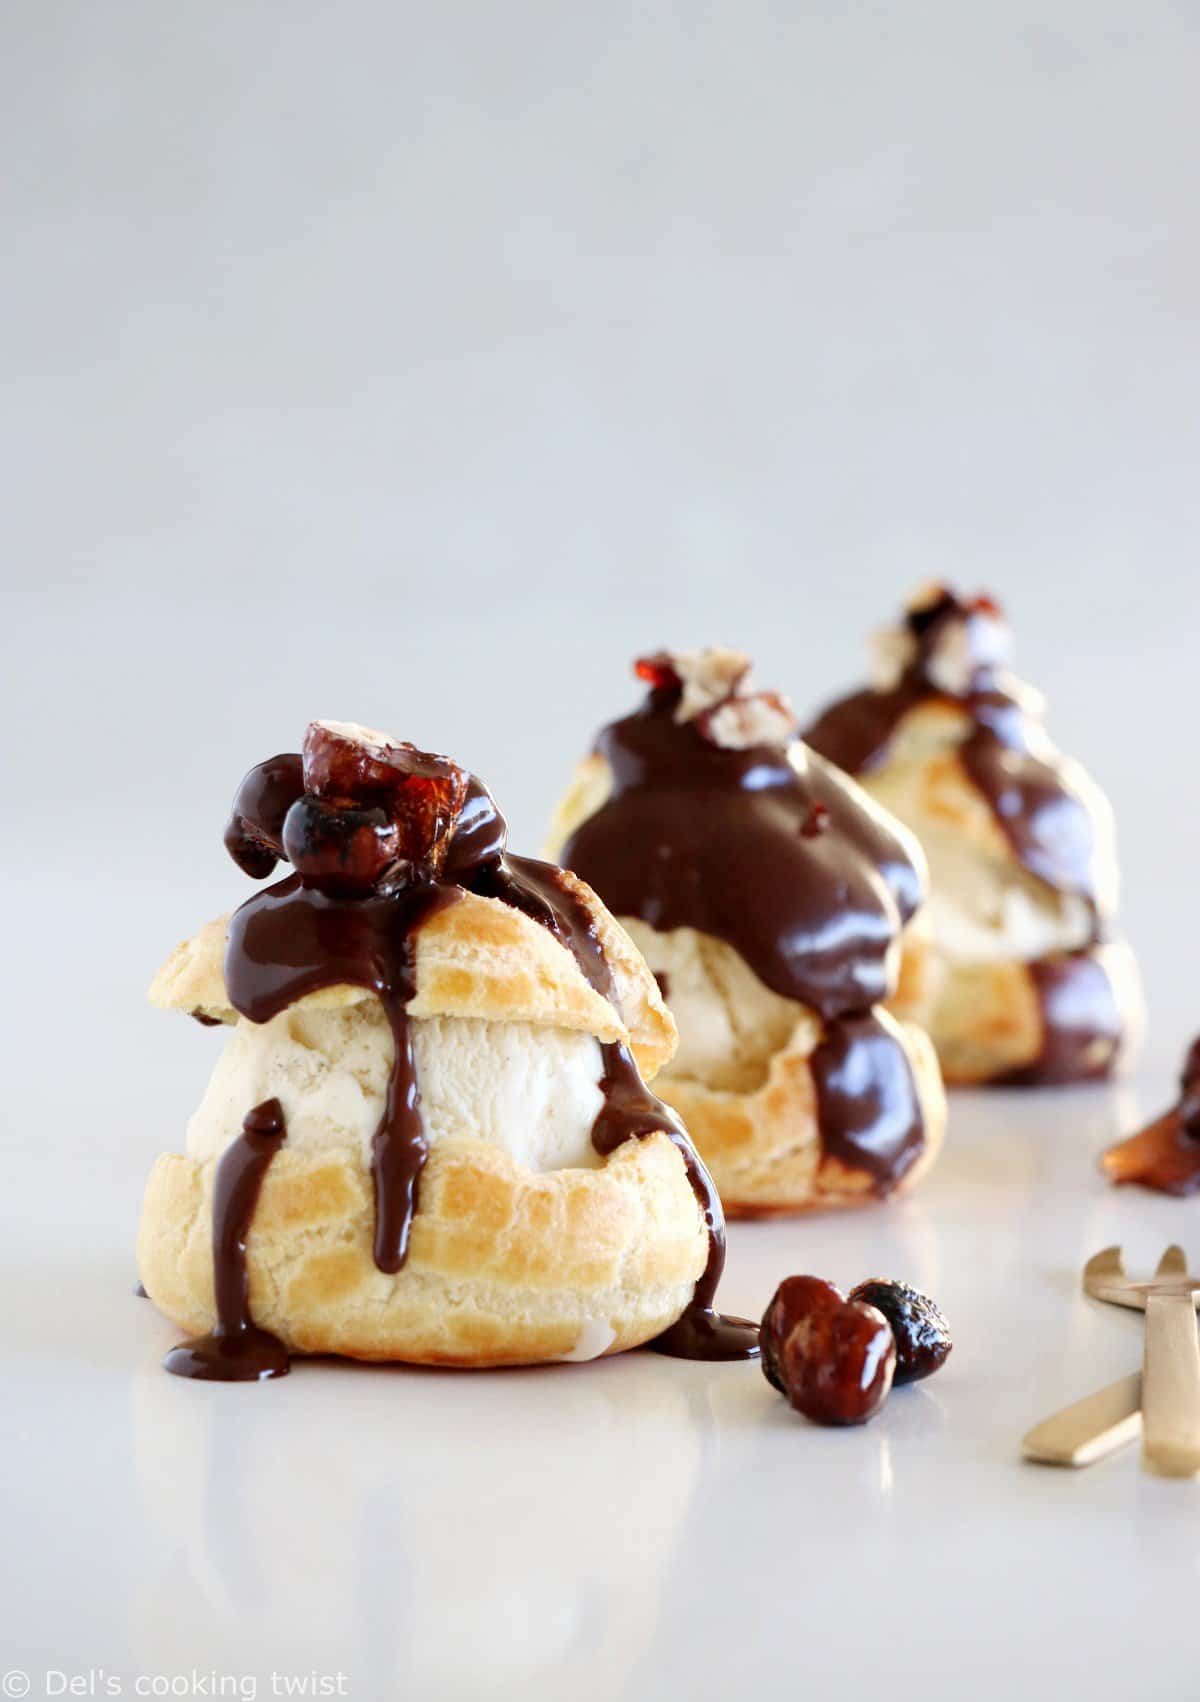 Chocolate Profiteroles with Candied Hazelnuts